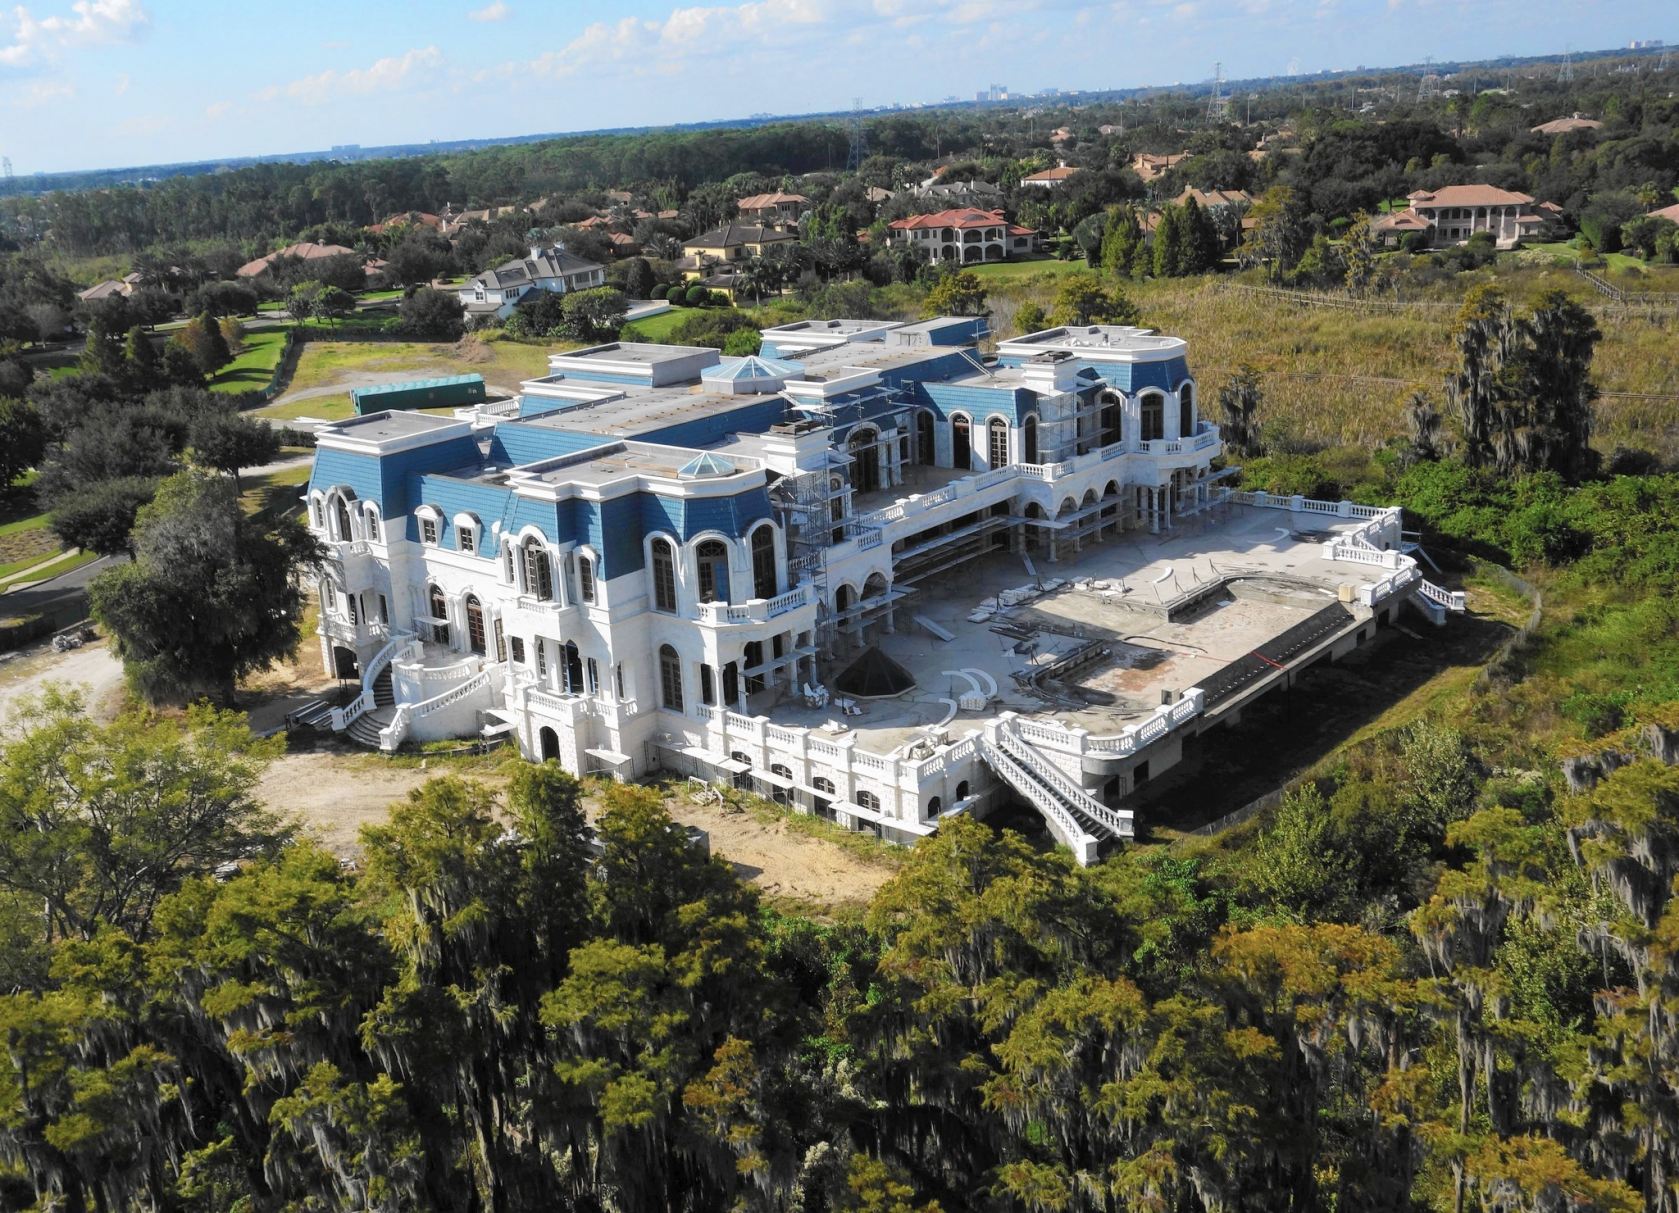 Unfinished Mansion, Other Big Projects Await Long Road To Completion ...